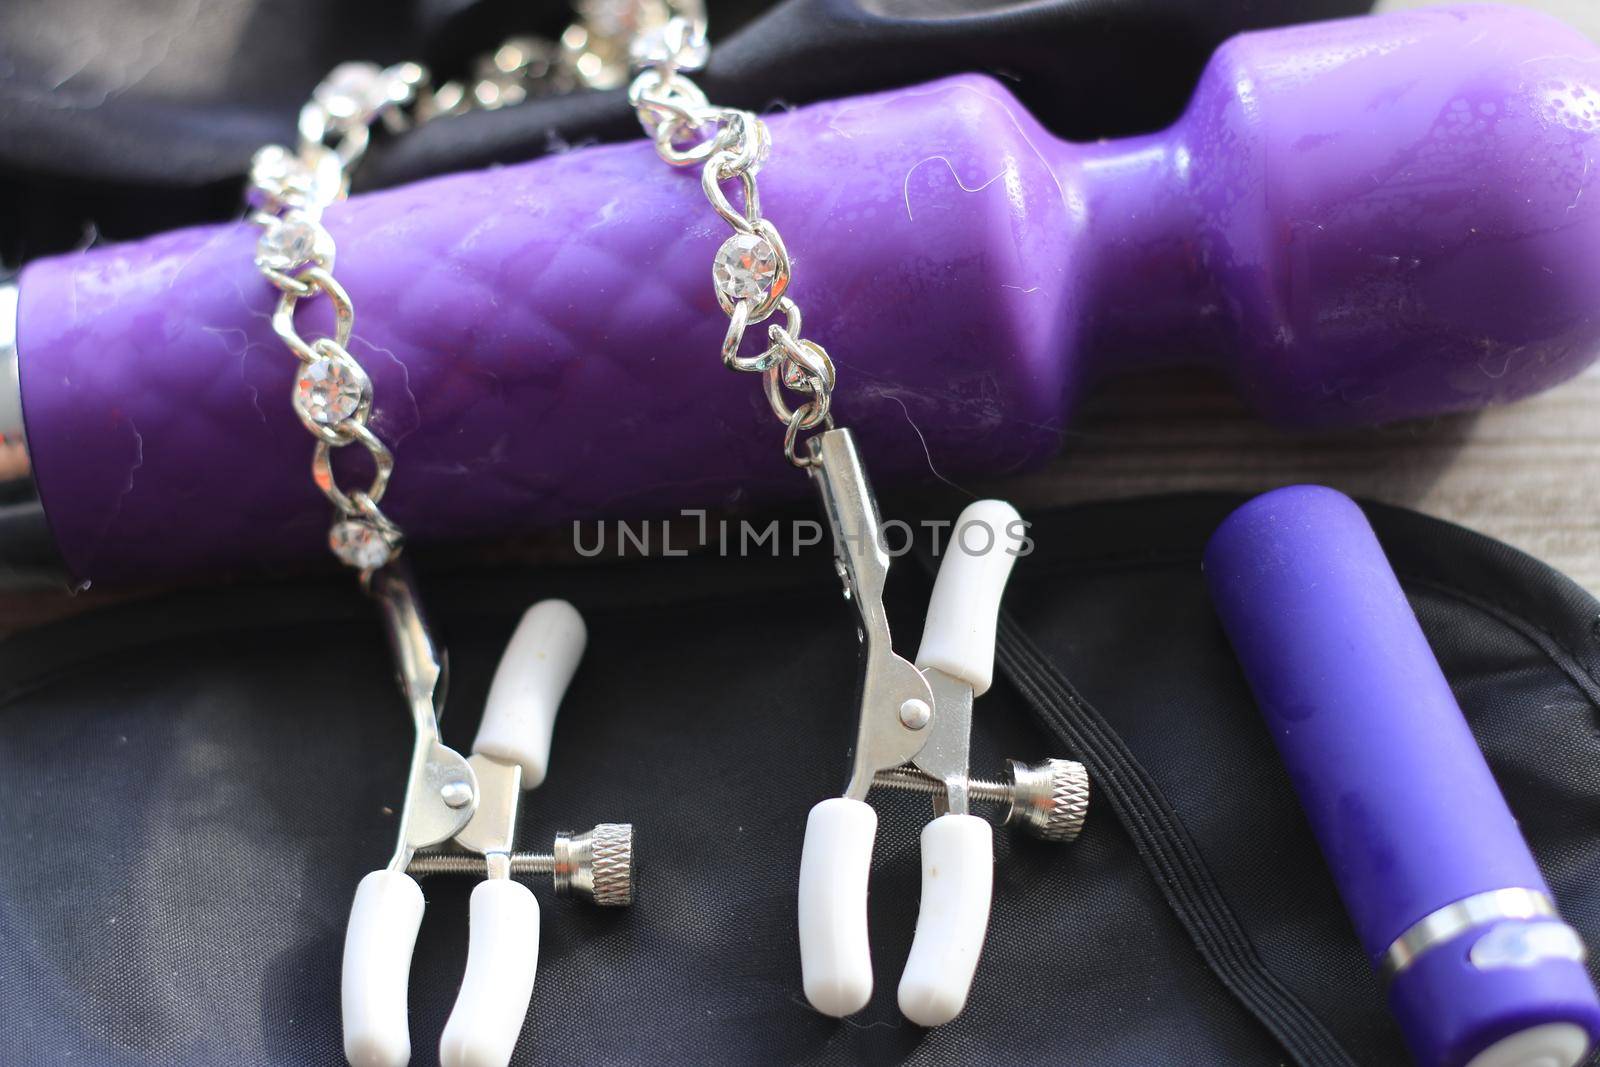 BDSM themed images showing a large dildo, nipple clamps, restraints, eye covers, and a condom. High quality photo